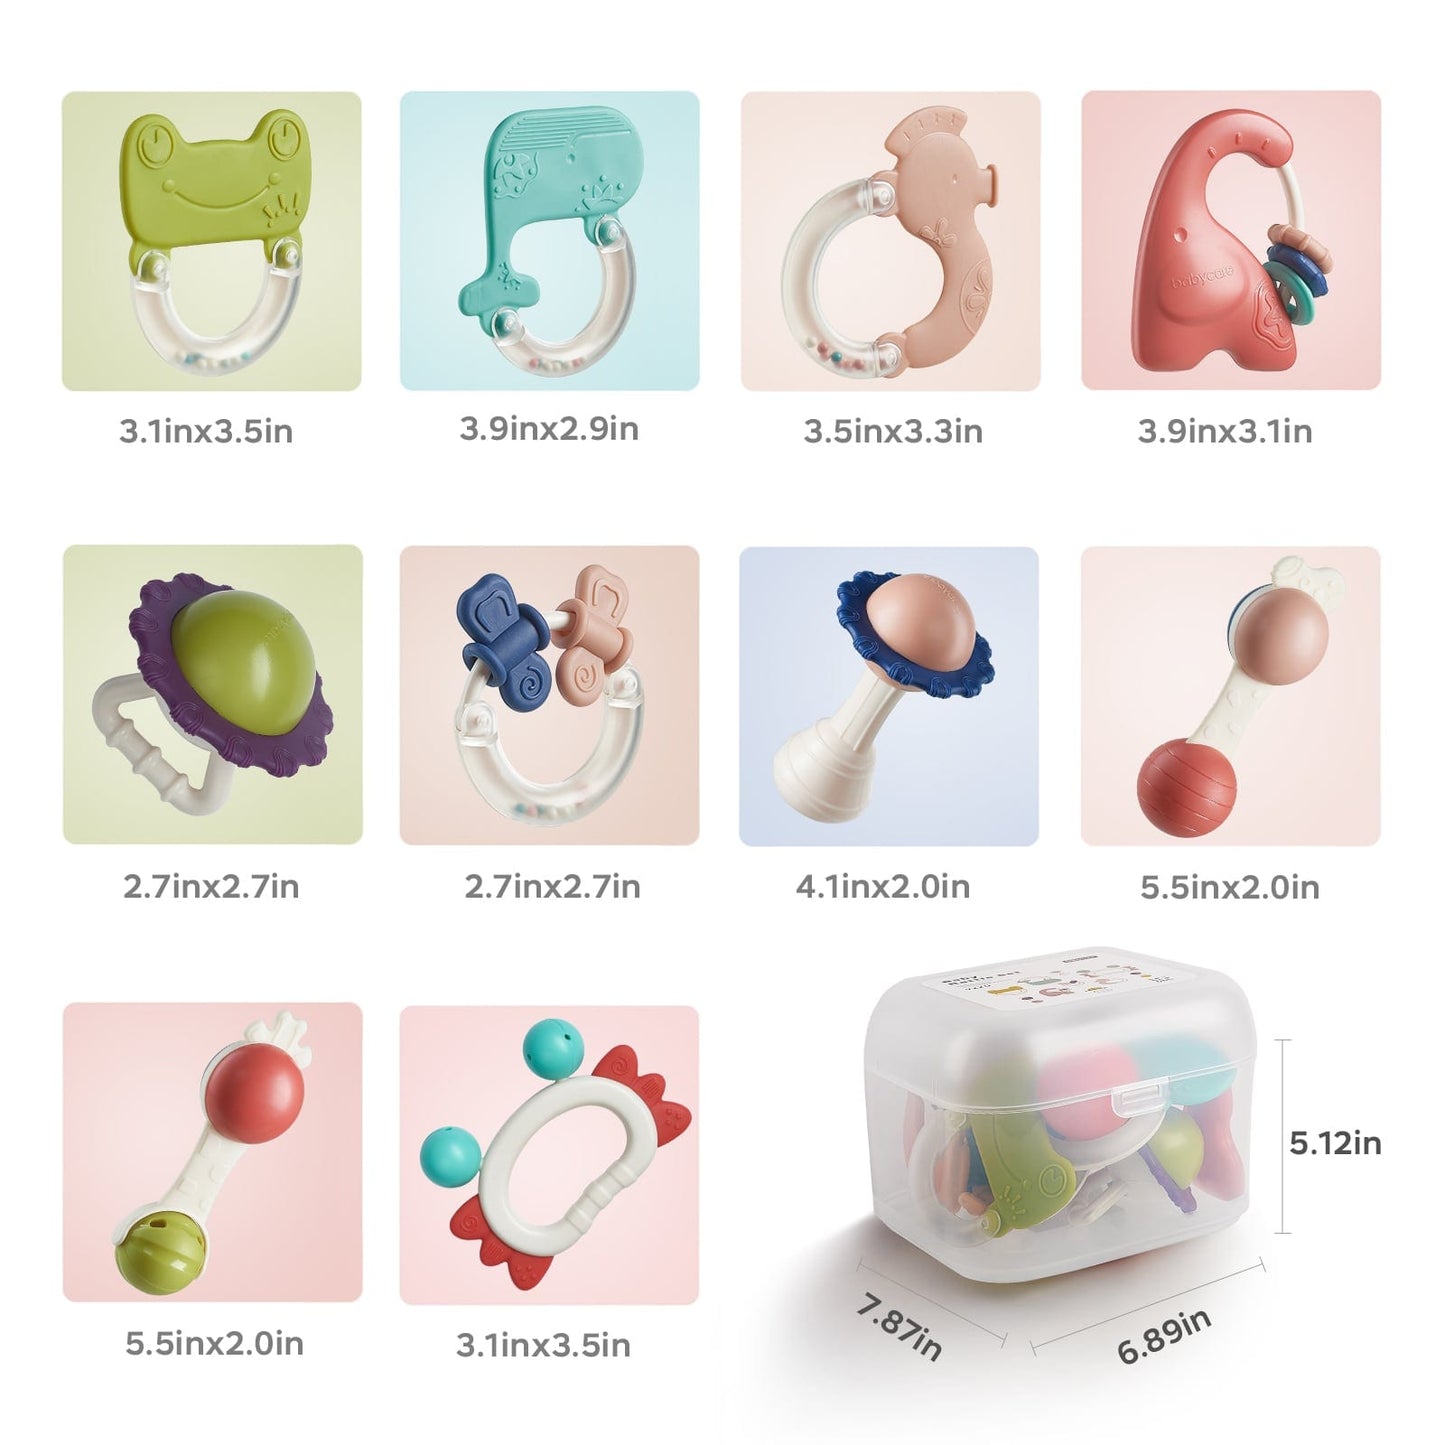 Baby Rattle Set for newborn - Bc Babycare